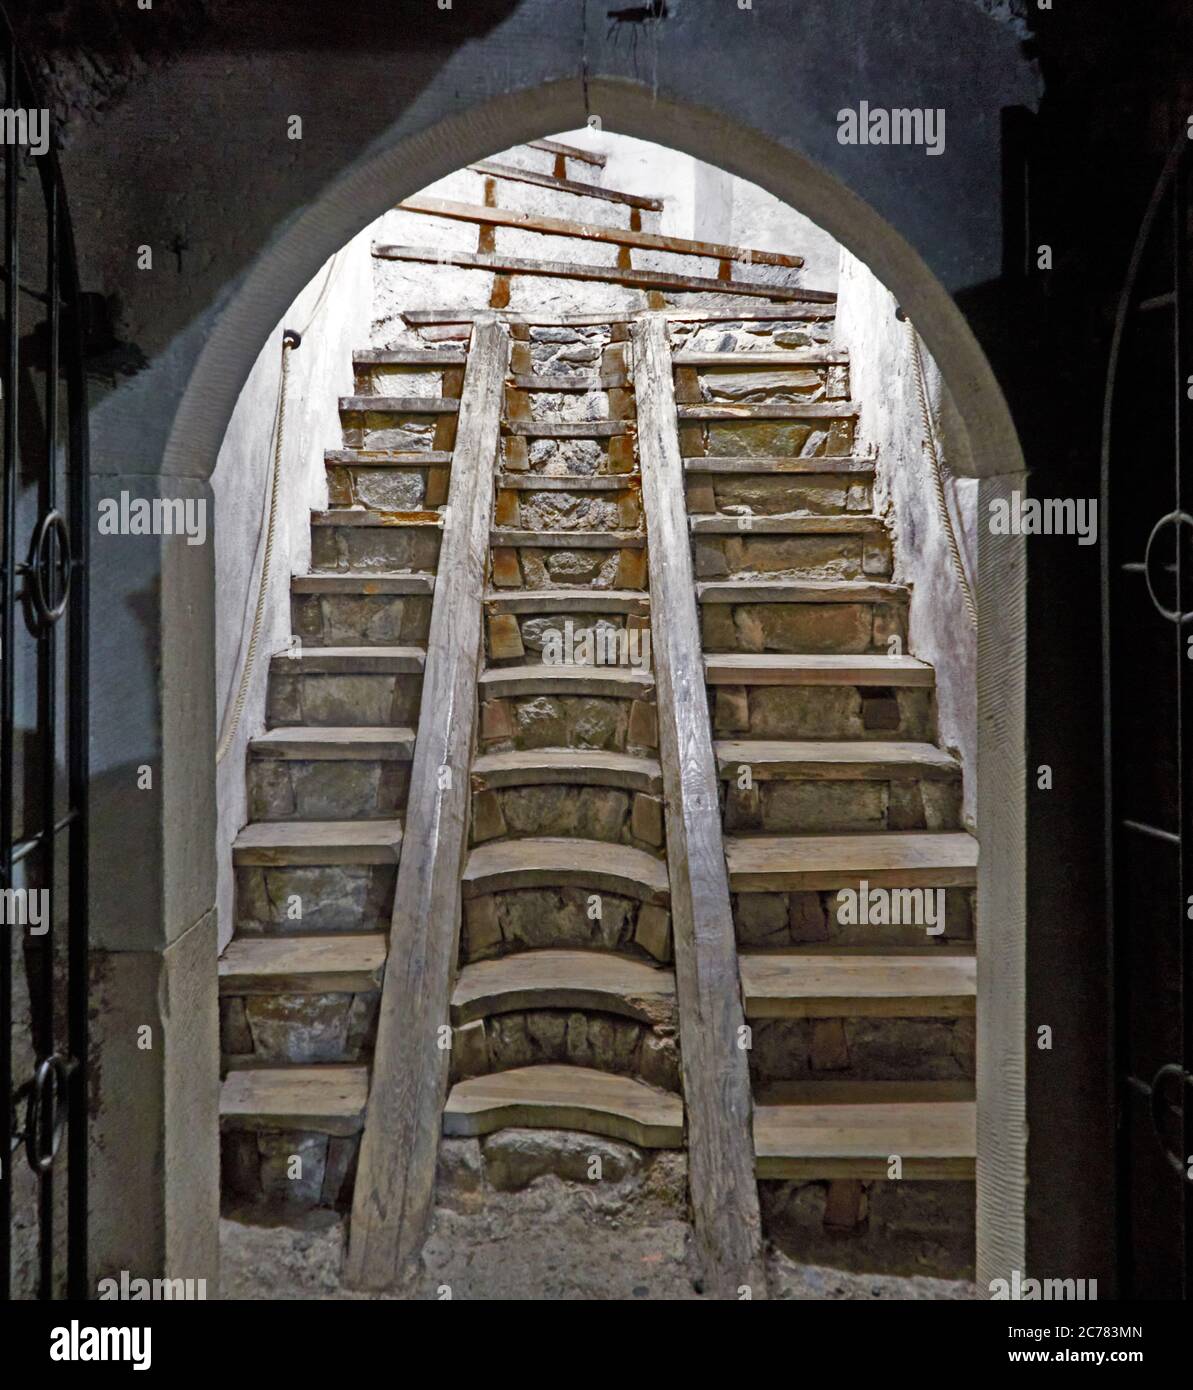 Poland, Czocha village, Luba? County, Lower Silesian    the typical staircase of the cellar of the castle specially adapted for the transport of wine barrelsThe Czocha castle  is a defensive castle in the village of Czocha, Origin of the stone castle dates back to 1329. Stock Photo